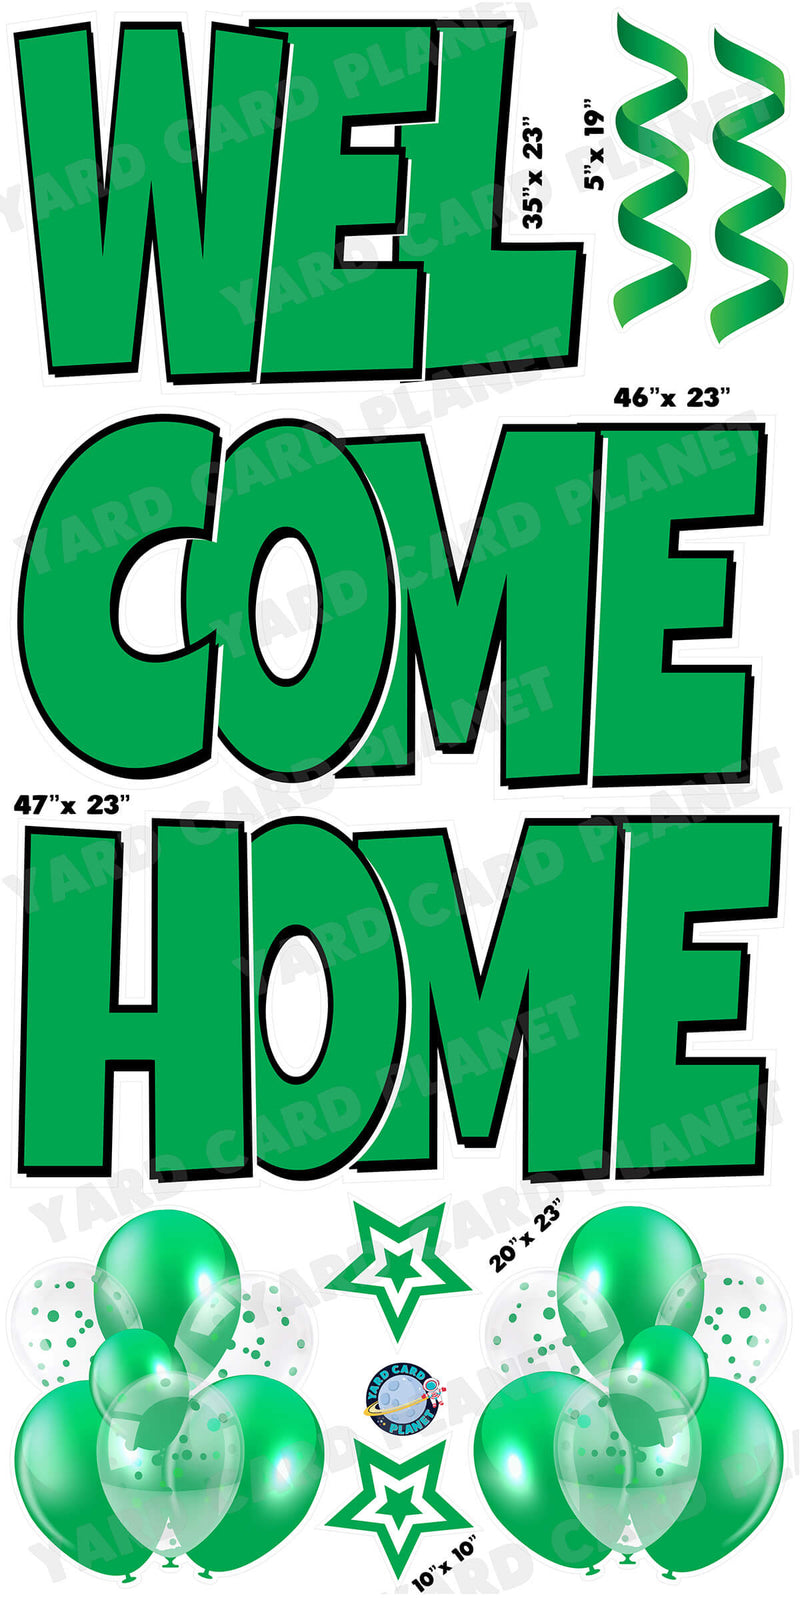 Large 23" Welcome Home Yard Card EZ Quick Sets in Luckiest Guy Font and Flair in Green Solid Color